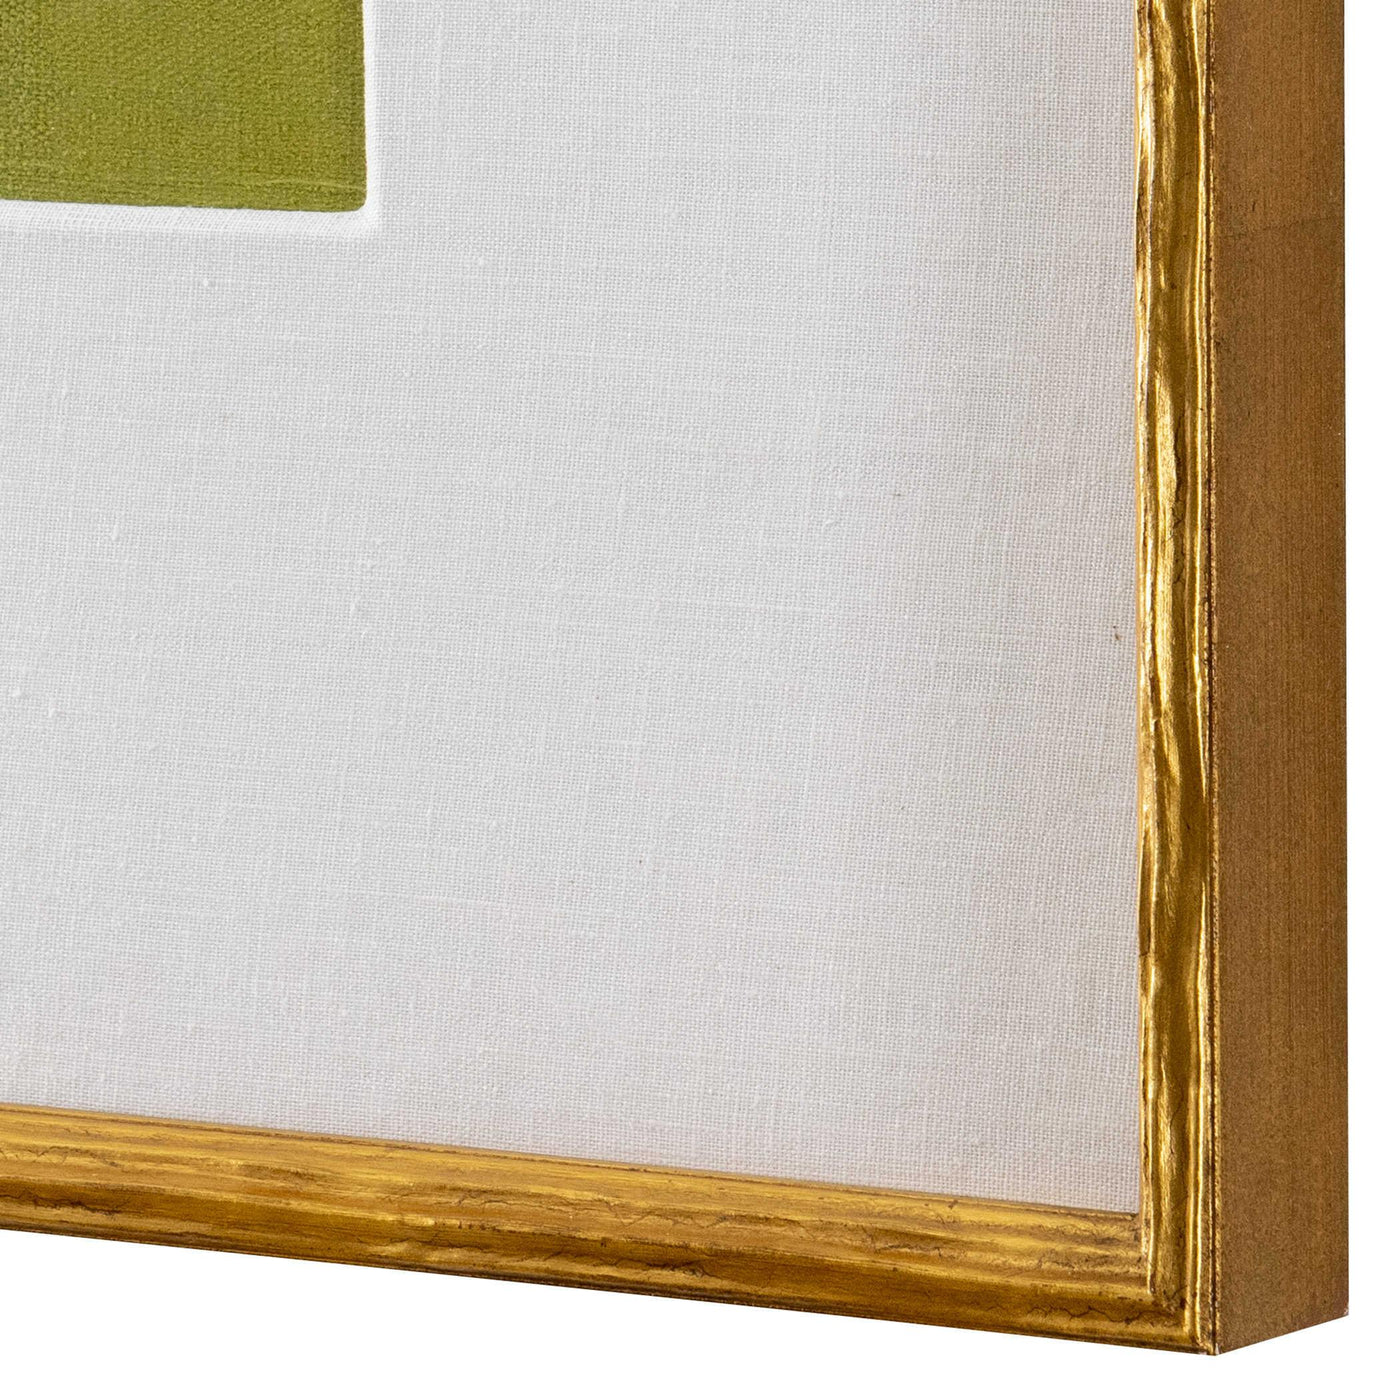 Uttermost Accessories Black Label Petite Bijoux Framed Canvases - Lime, S/2 House of Isabella UK